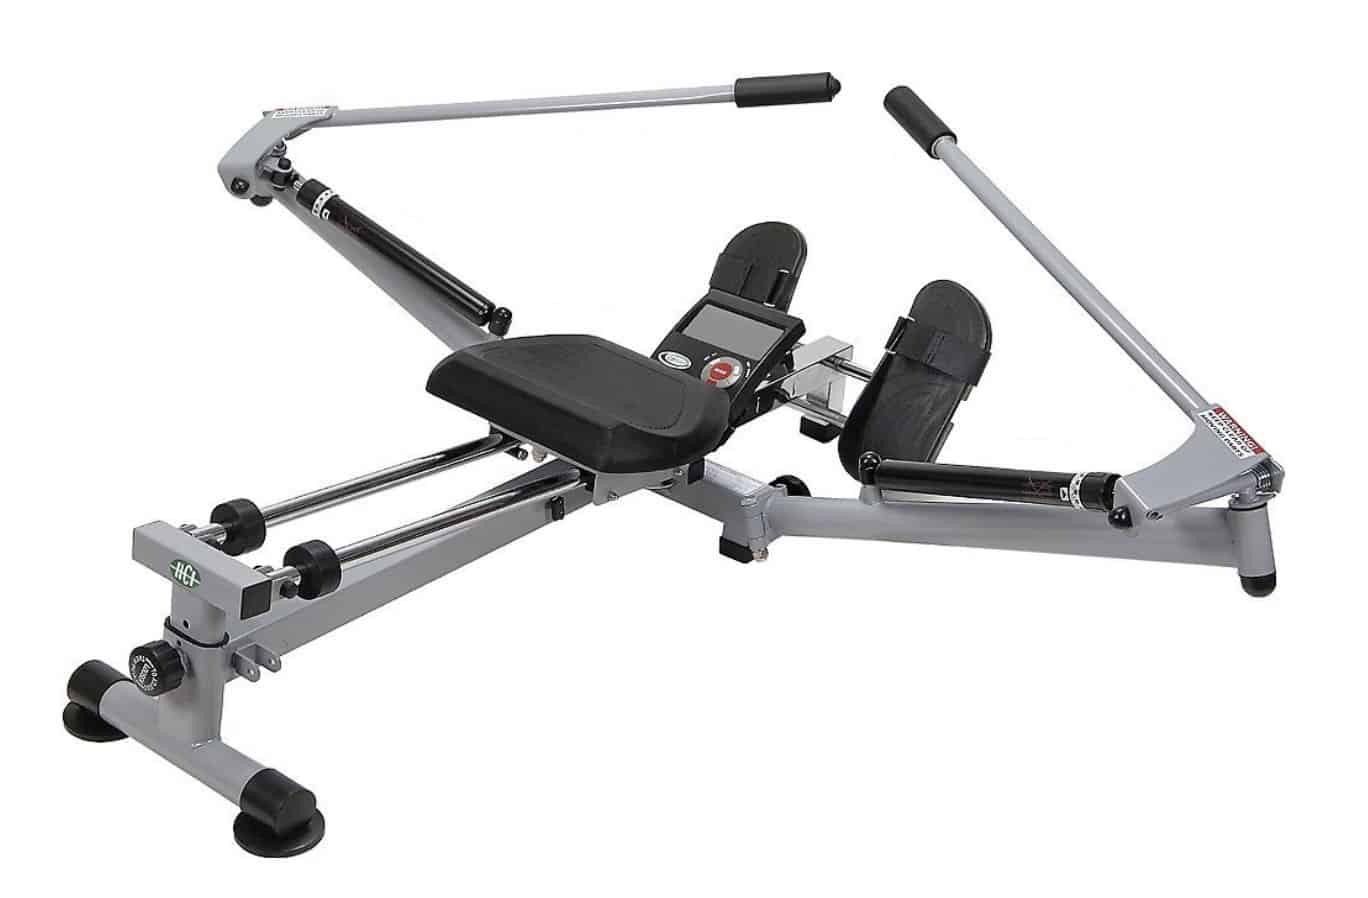 HCI Fitness Sprint Outrigger Scull Rowing Machine Review